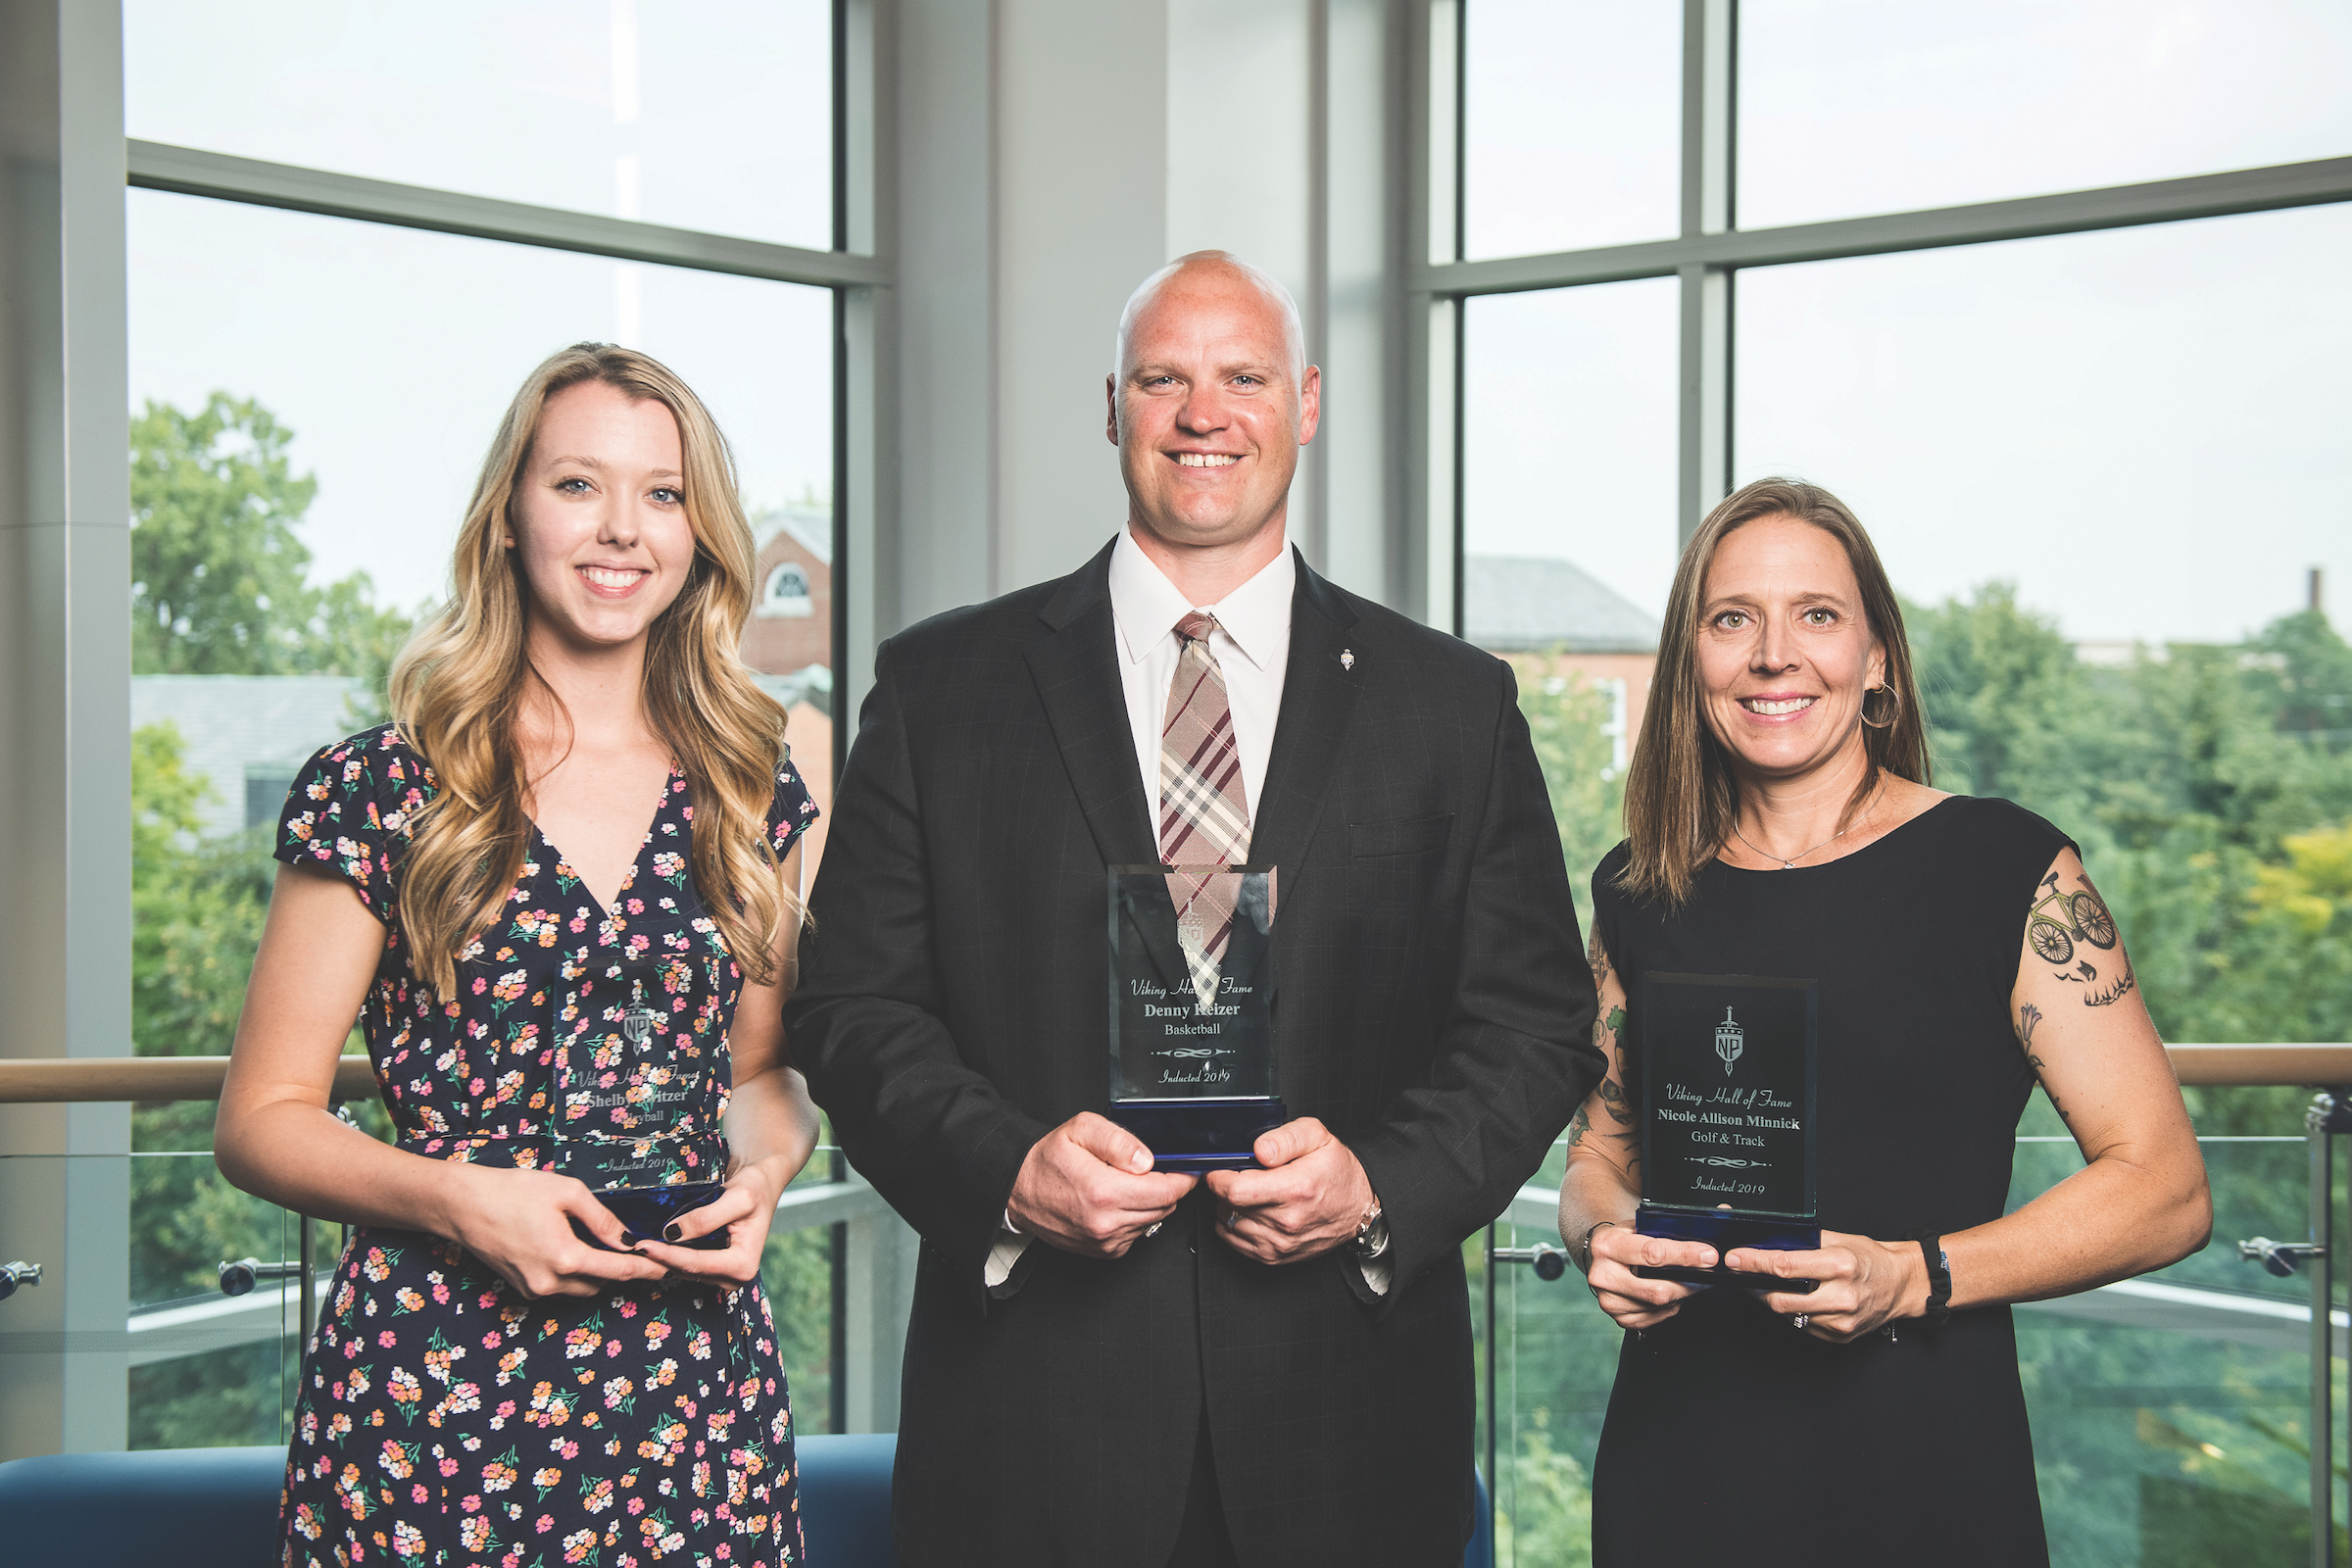 Shelby Switzer C’14, Denny Keizer C’99, and Nicole Minnick C’98 were inducted into the Viking Hall of Fame.